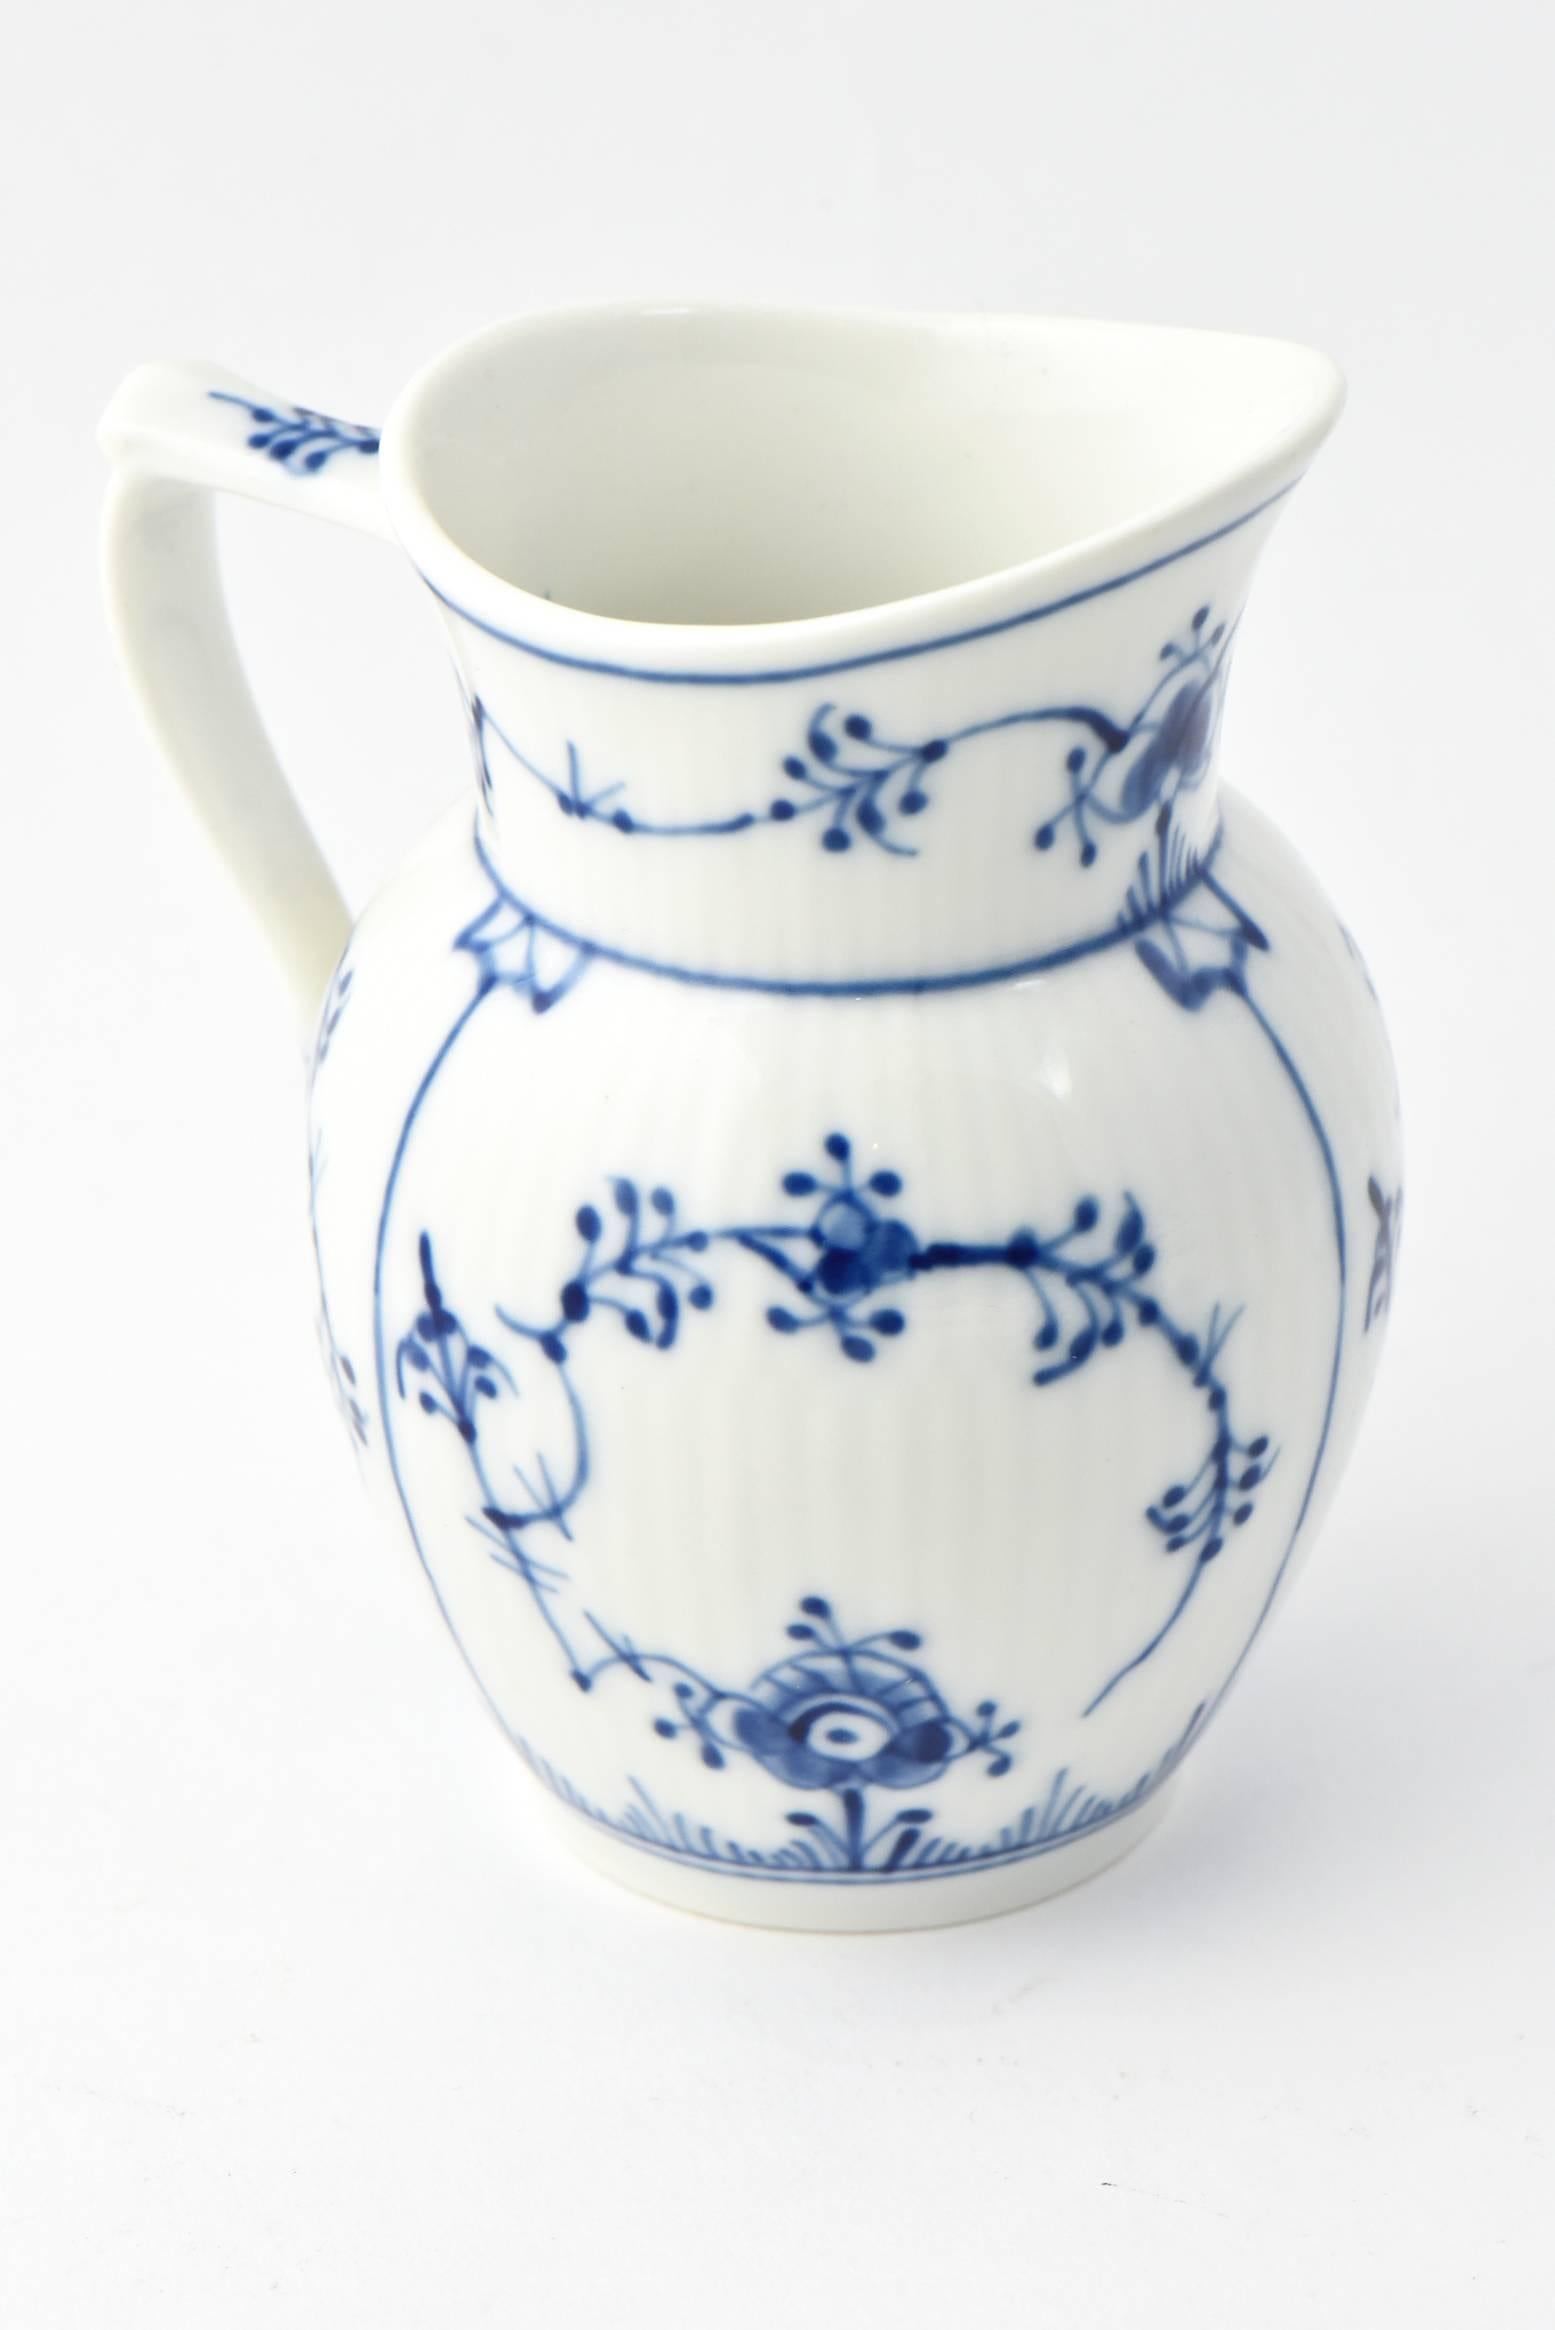 Royal Copenhagen three-piece porcelain set in the blue fluted pattern. The blue fluted pattern was introduced in 1775, the same year it was founded in Denmark, and has been in continuous production for more than 230 years. Measures: Sugar bowl, 3.5